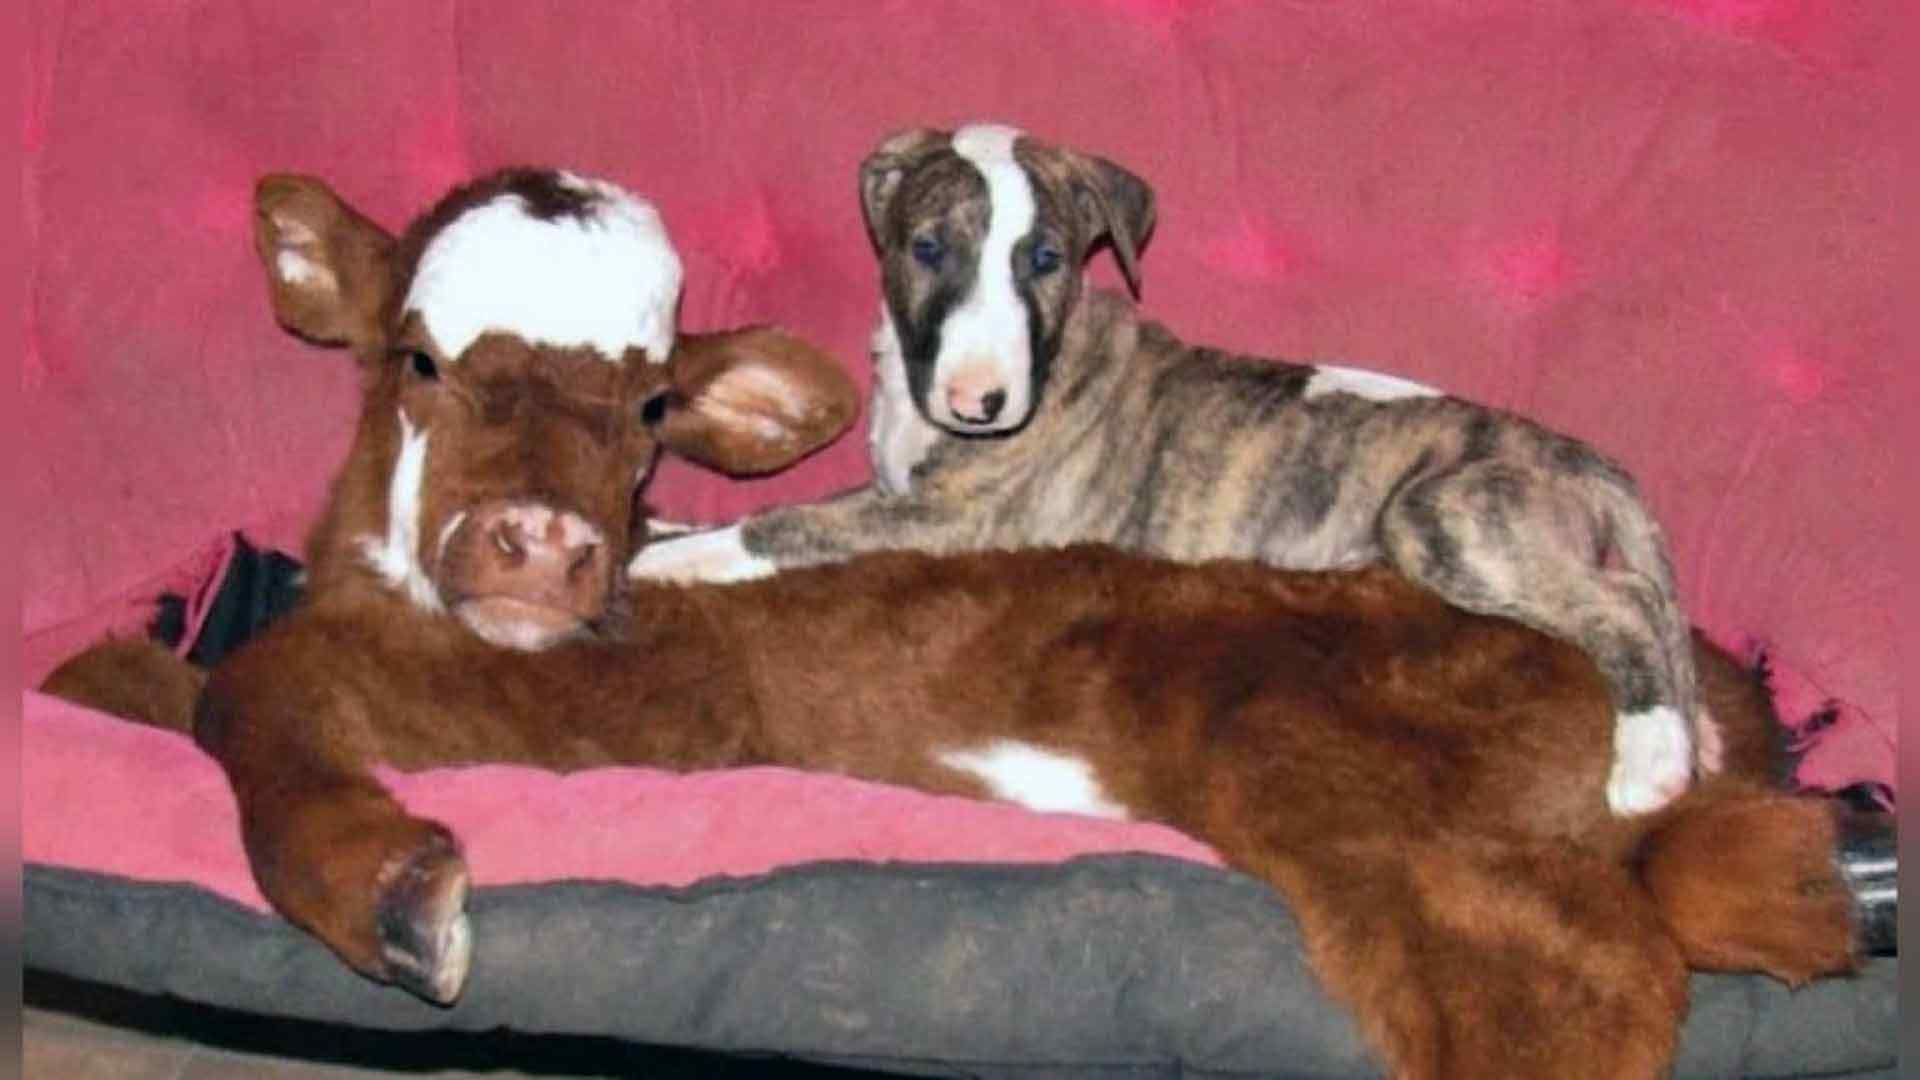 An amazing friendship between a miniature cow and her dog pack